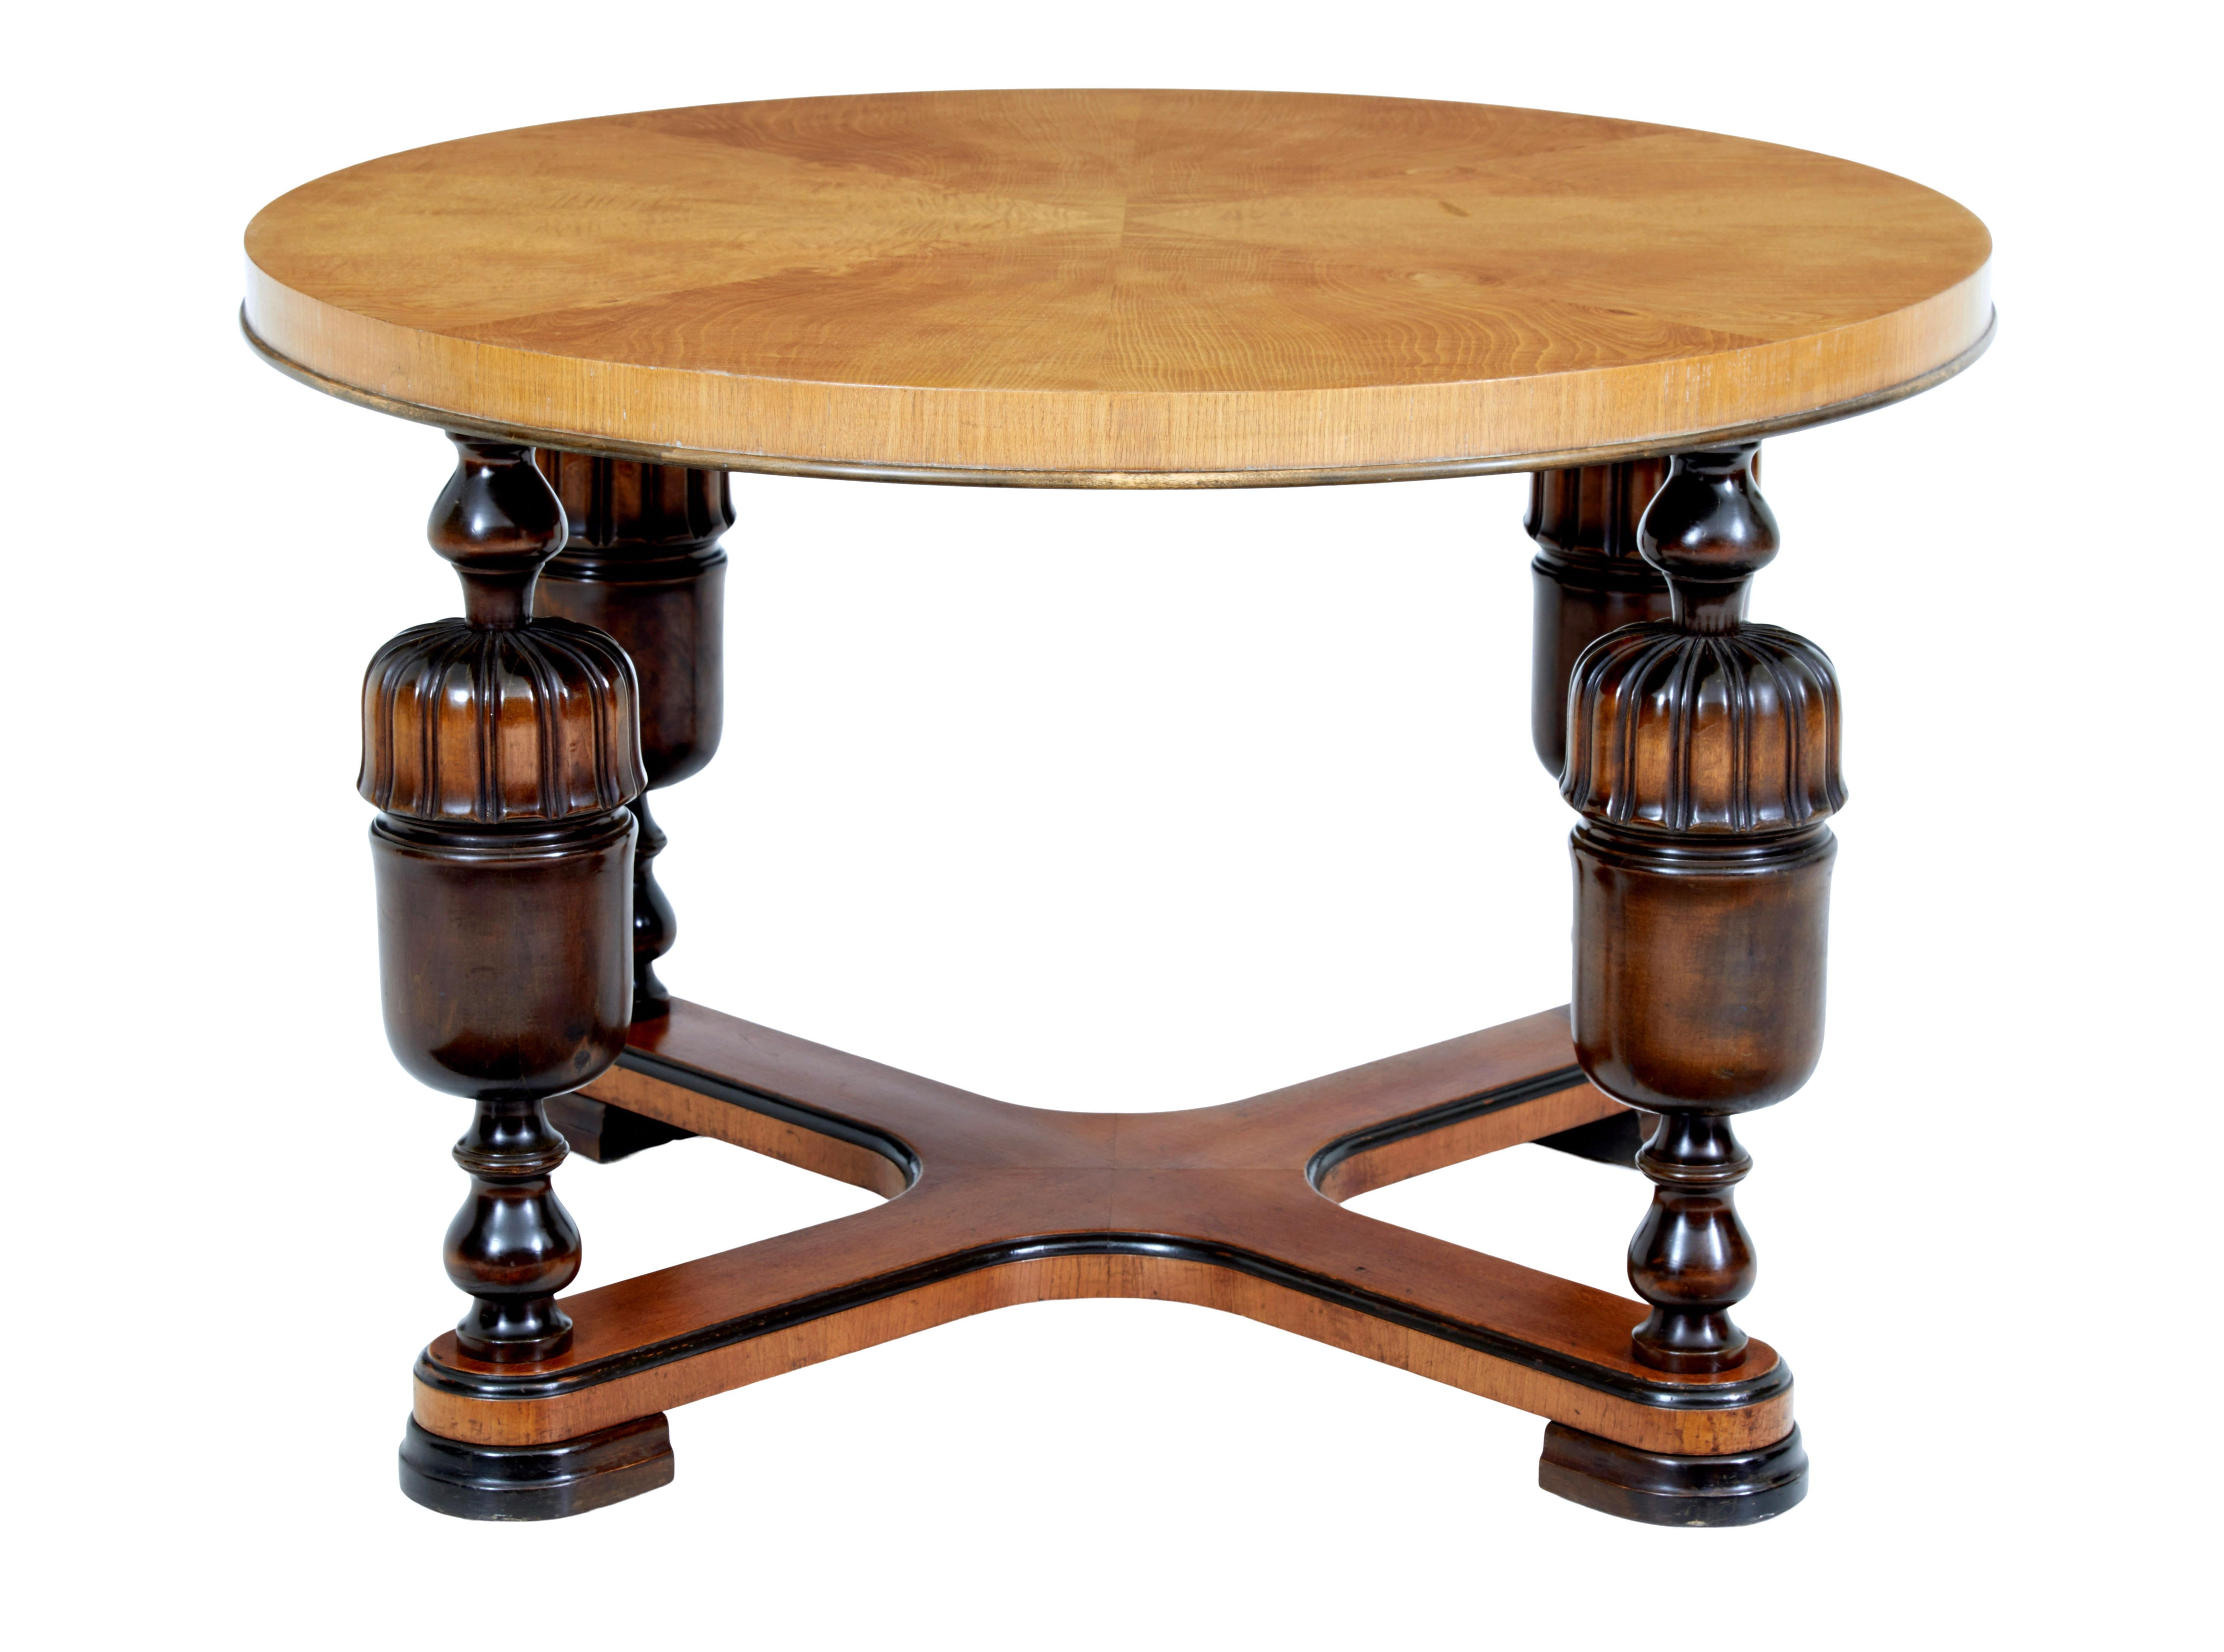 20th century art deco birch and elm coffee table, circa 1930.

Circular table top with matched elm veneers. Thick top is supported by 4 turned and fluted baluster legs united by an x-frame stretcher. Standing on ebonized flat hoof feet.

Minor